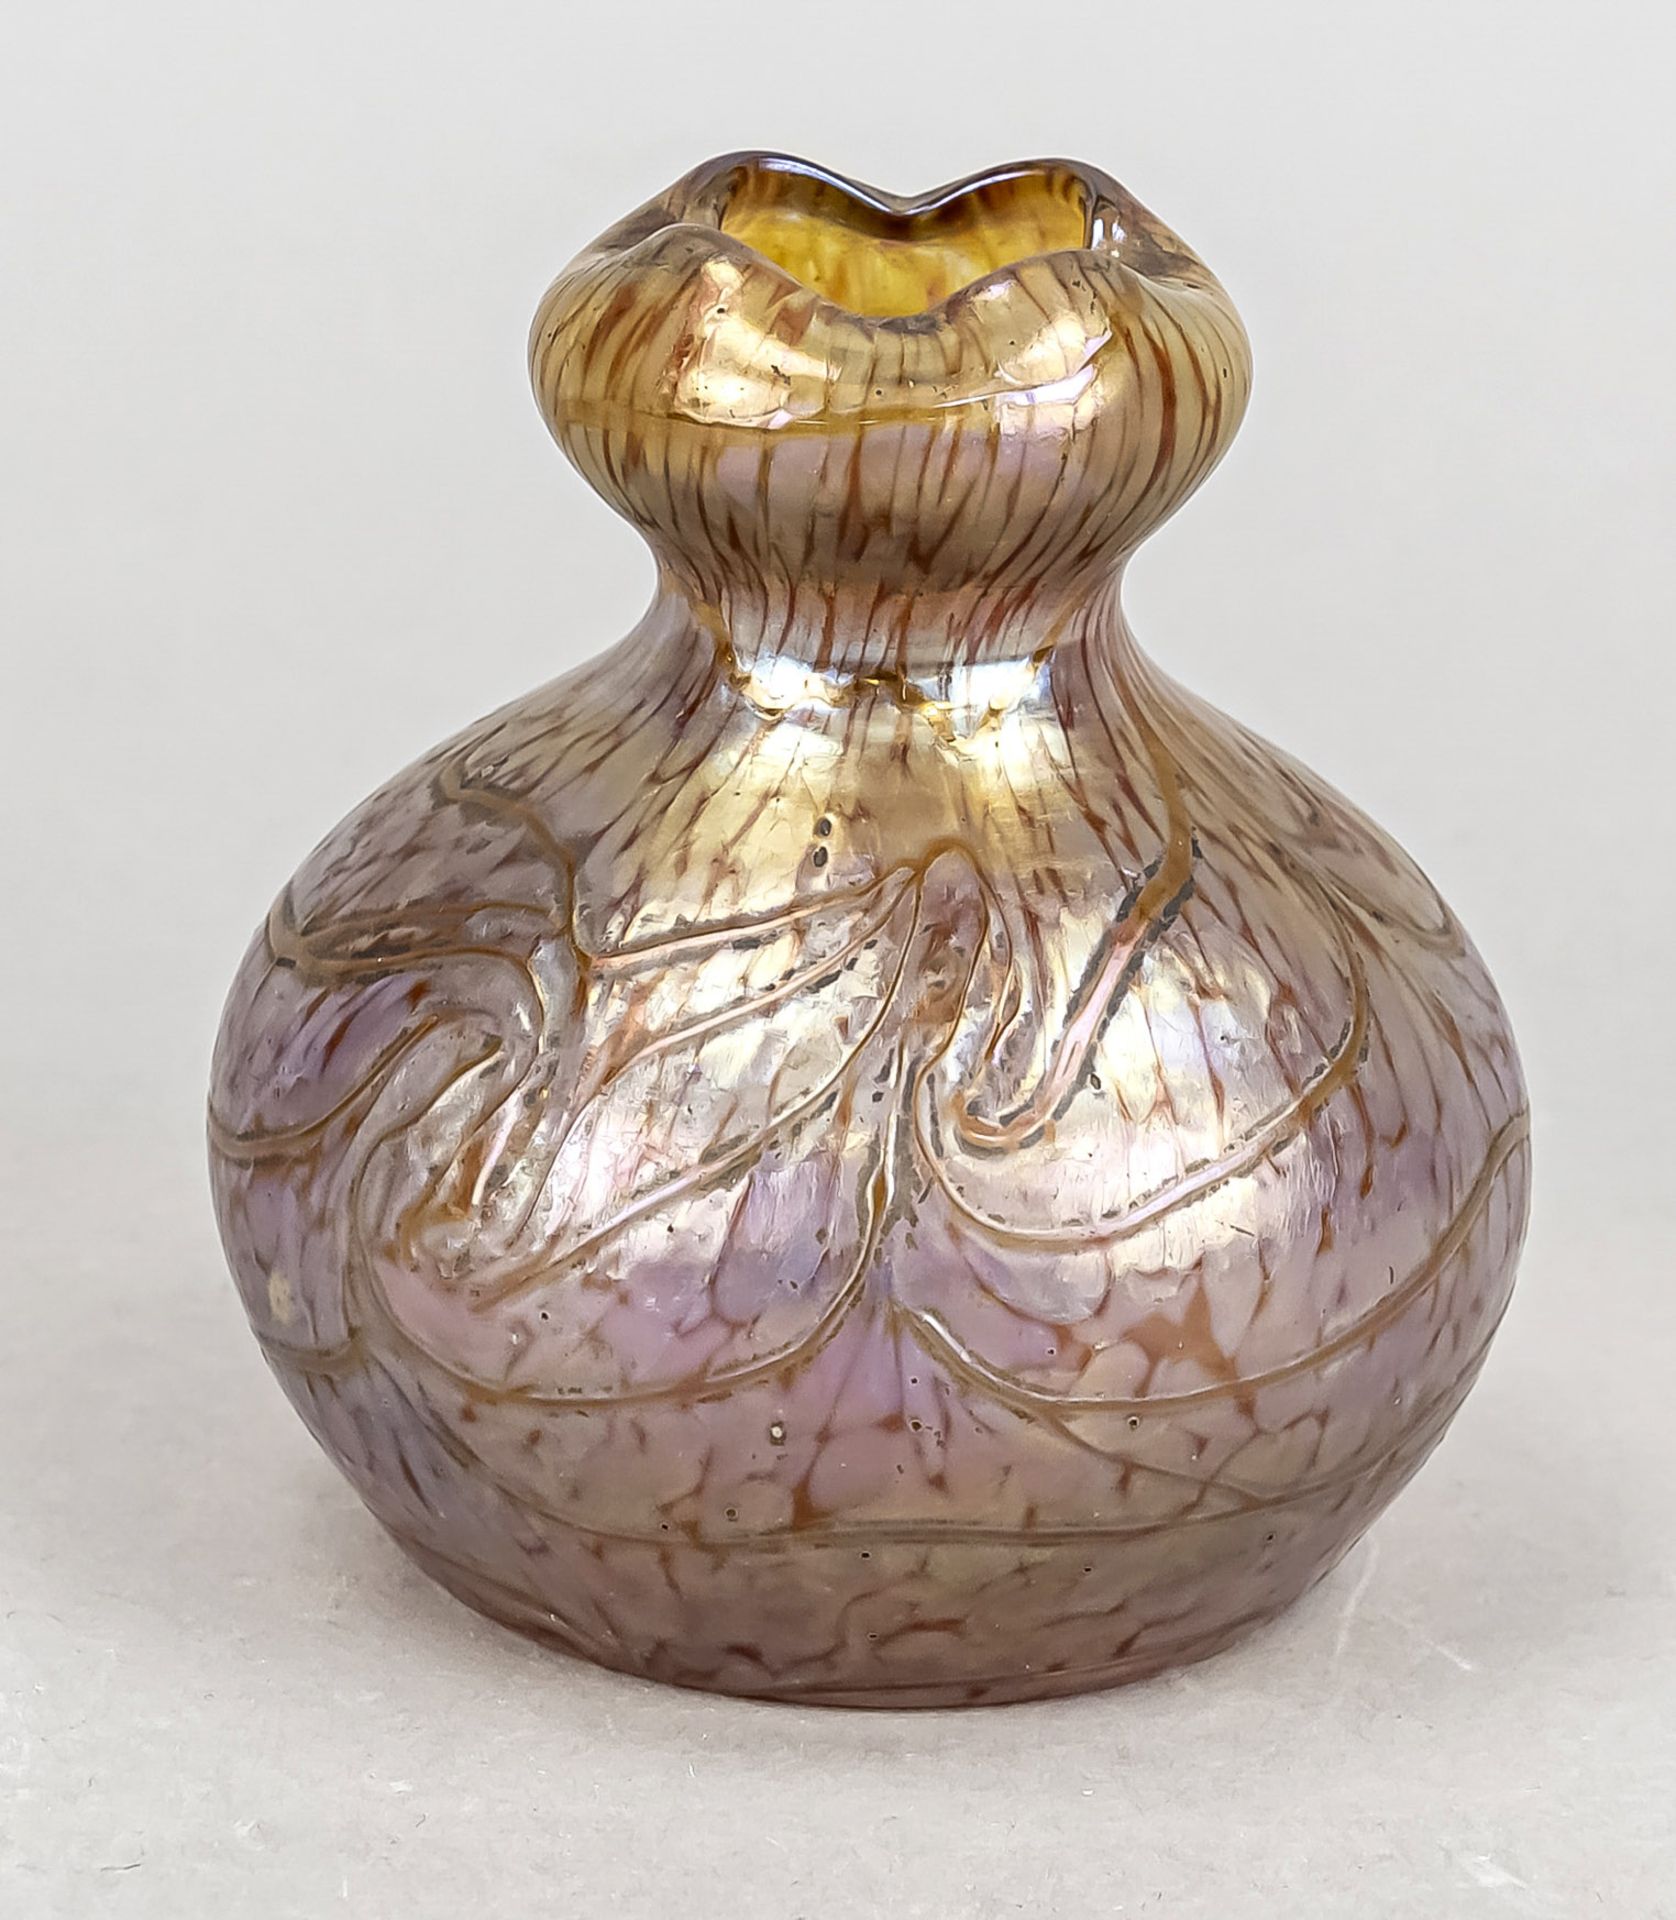 Vase, 20th c., round stand, bulbous body, 4-pass mouth, clear glass with orange stain enamels and